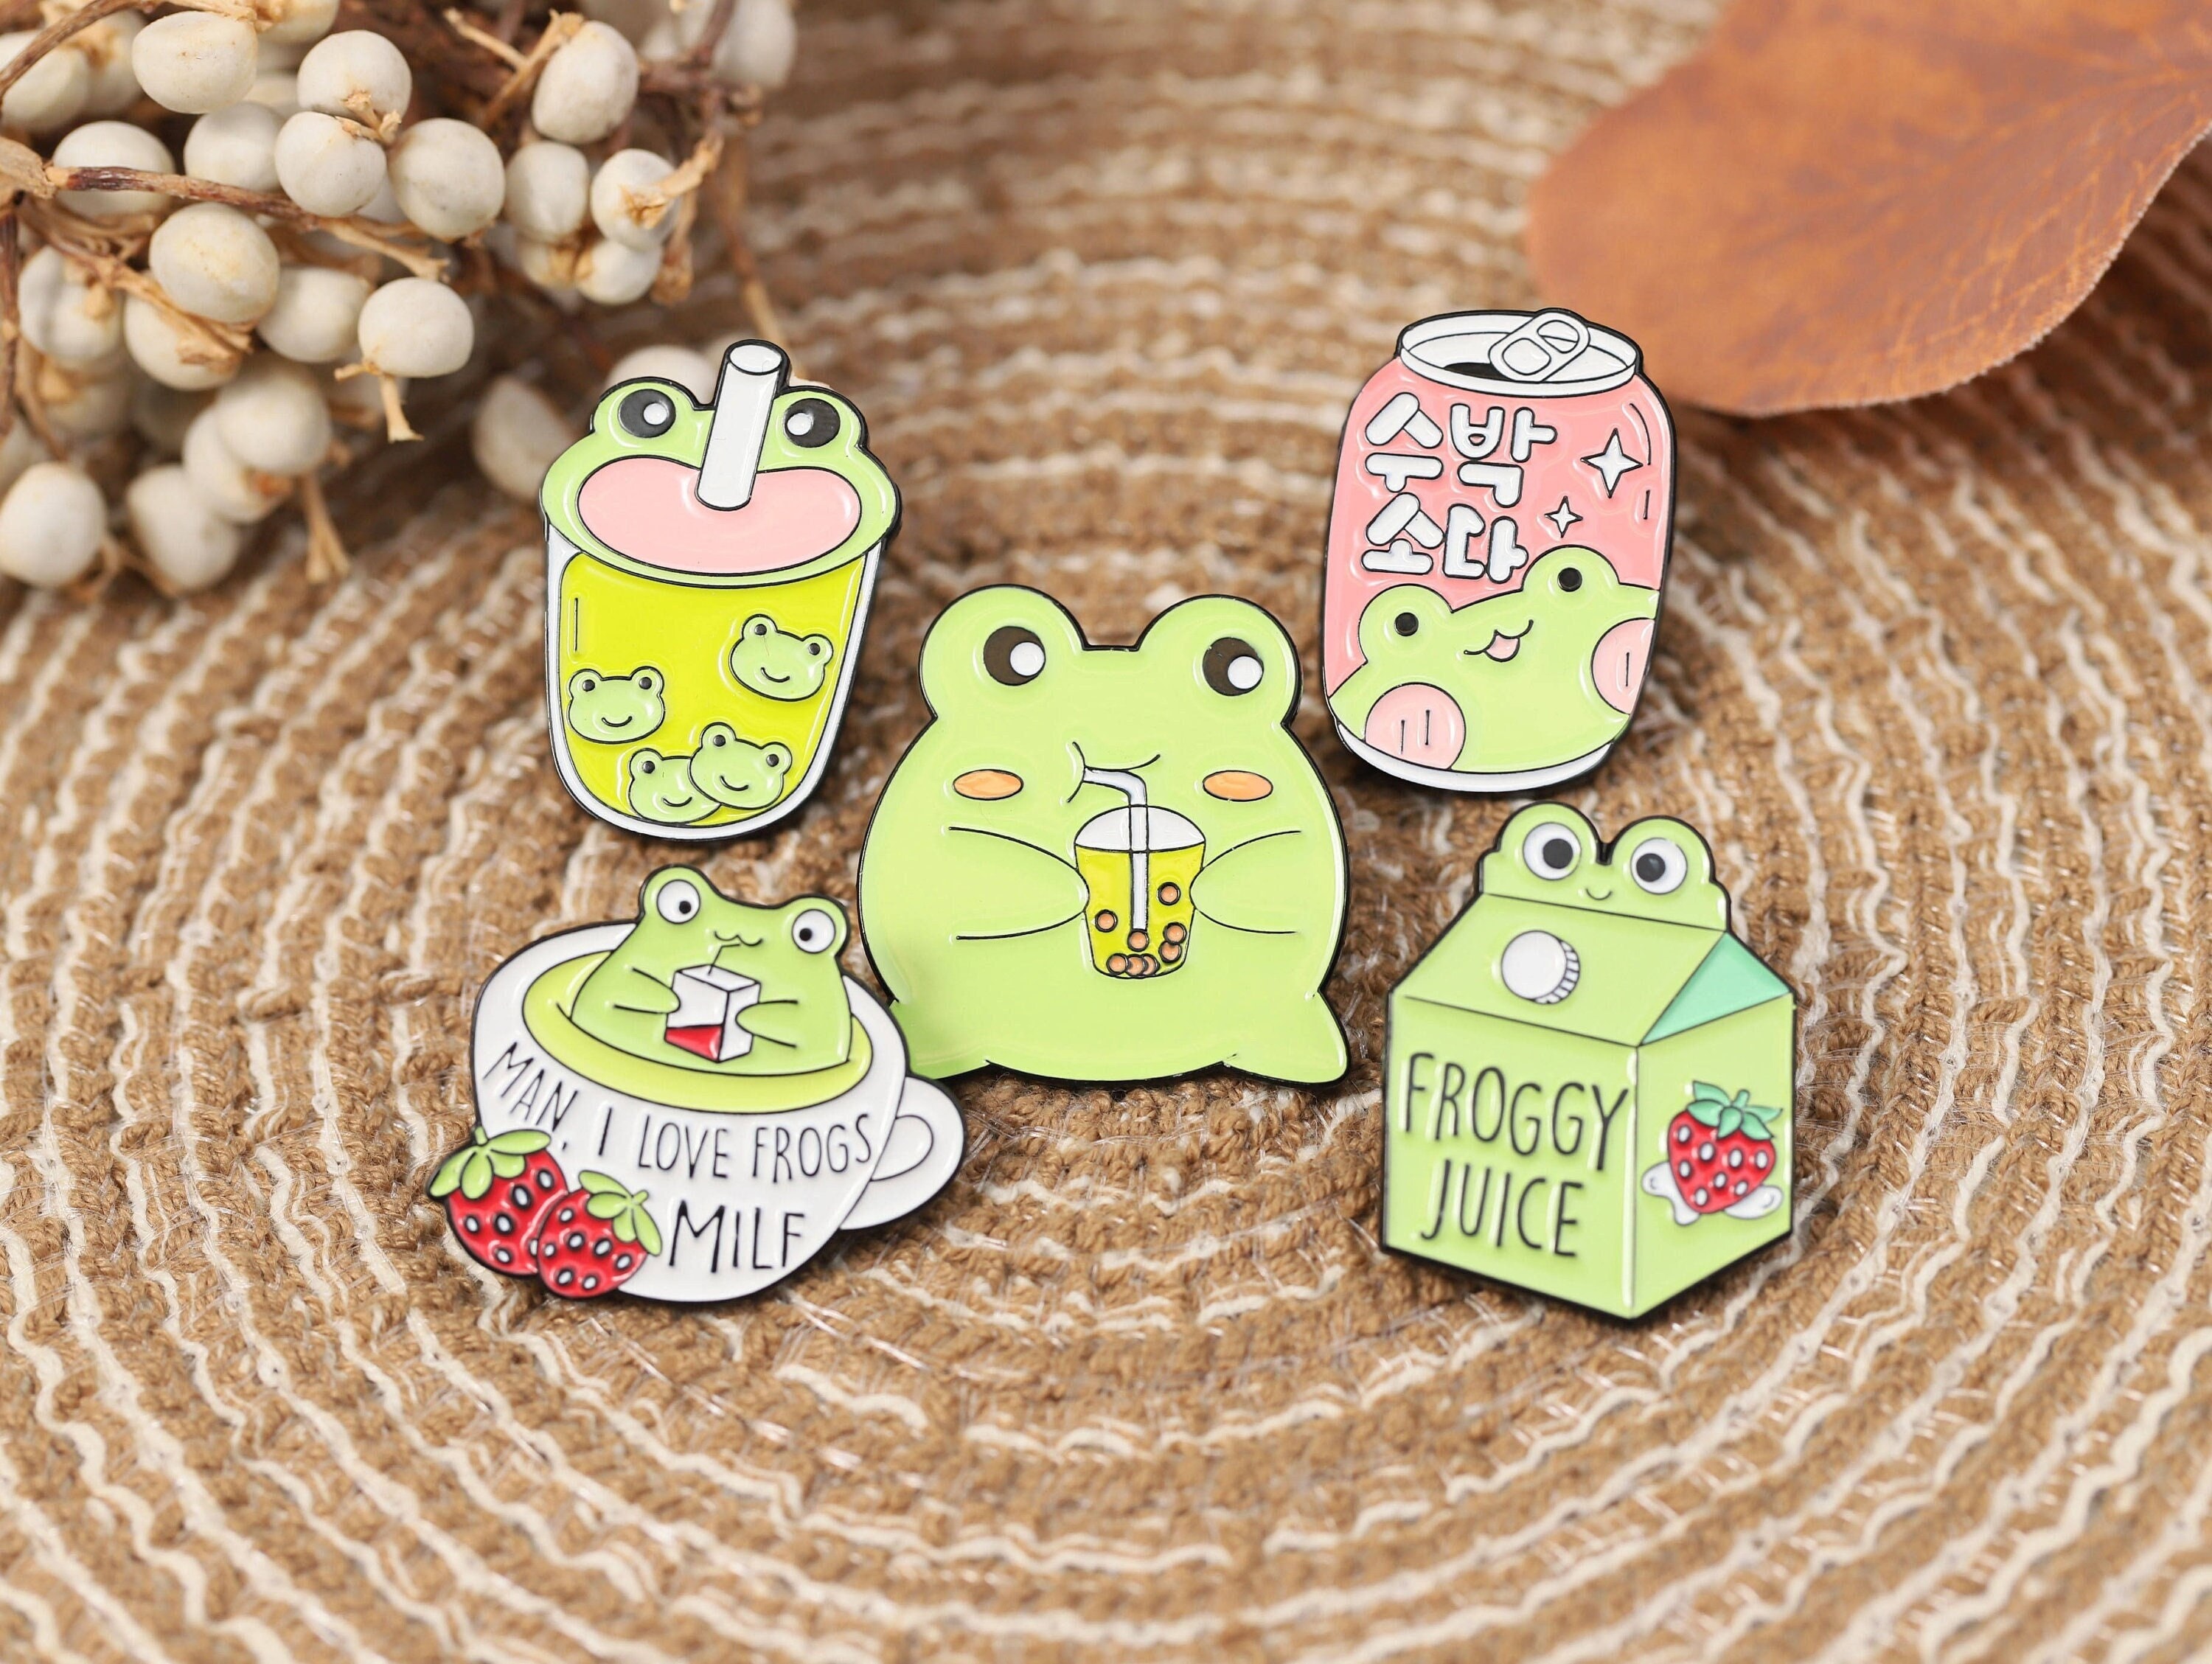 Frog Pin V6419 – Jewelry 10